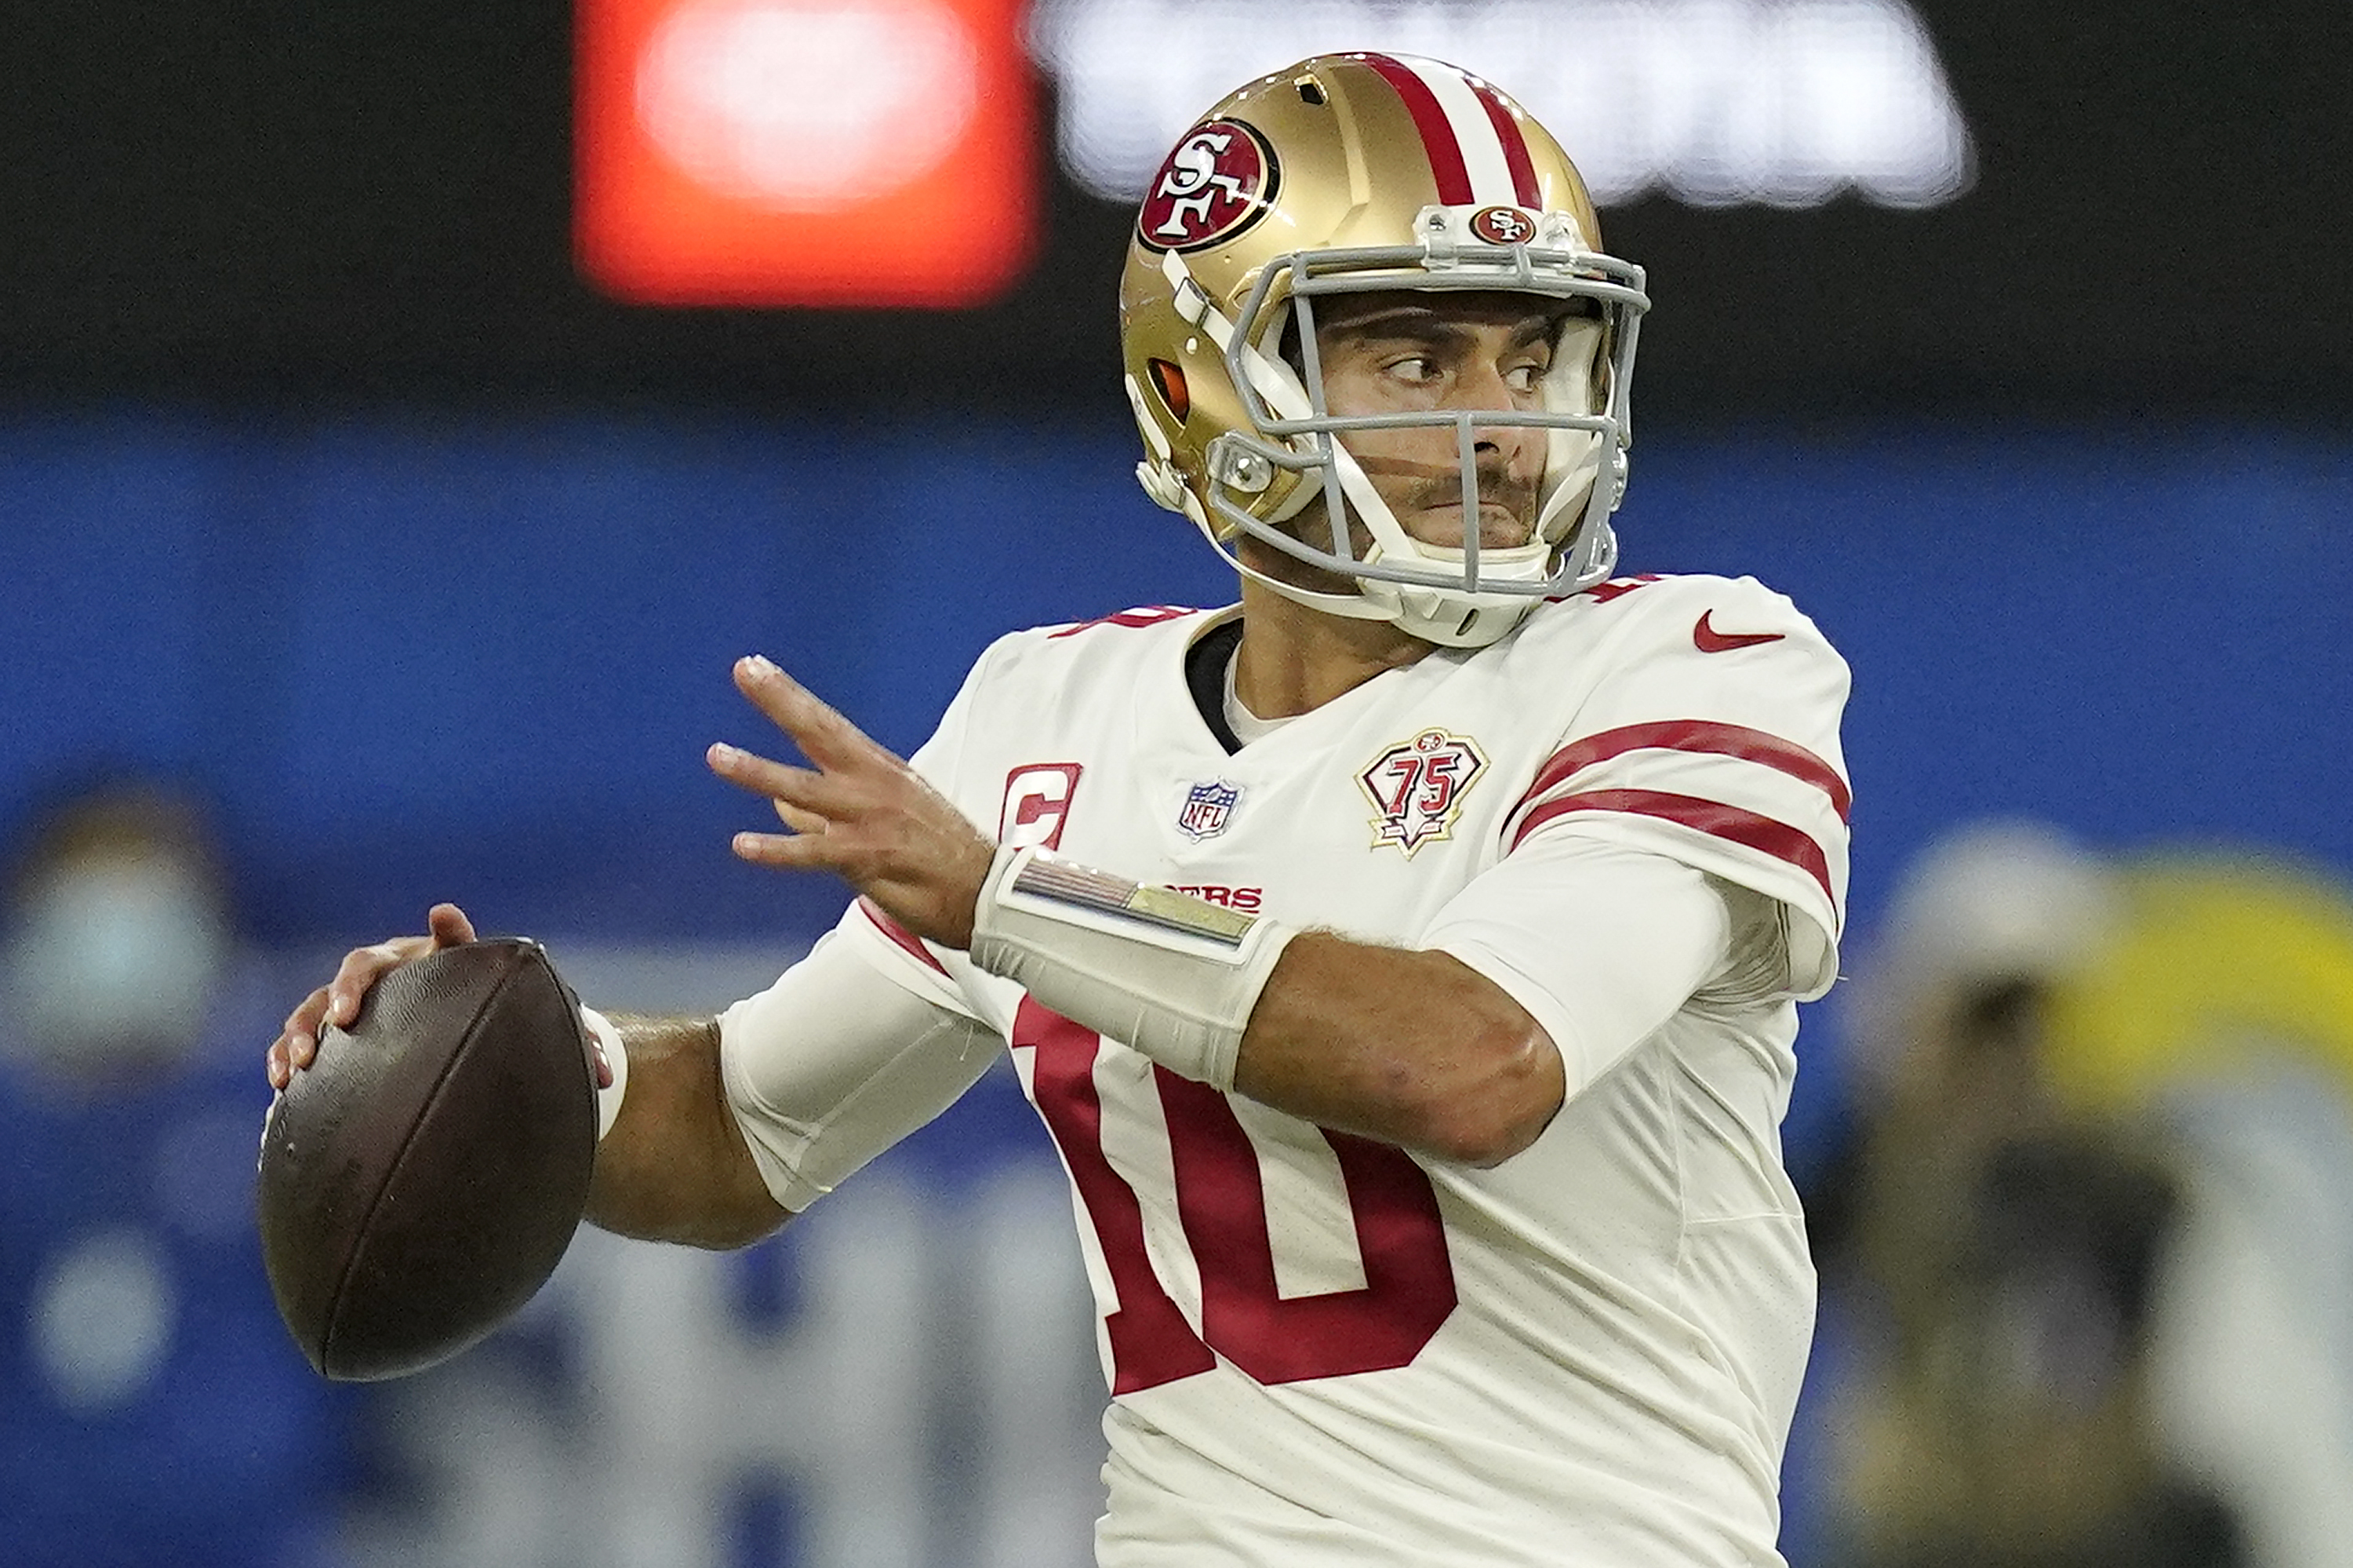 Schefter: 49ers' Jimmy Garoppolo 'Not a Lock' to Be Traded amid Offseason Rumors